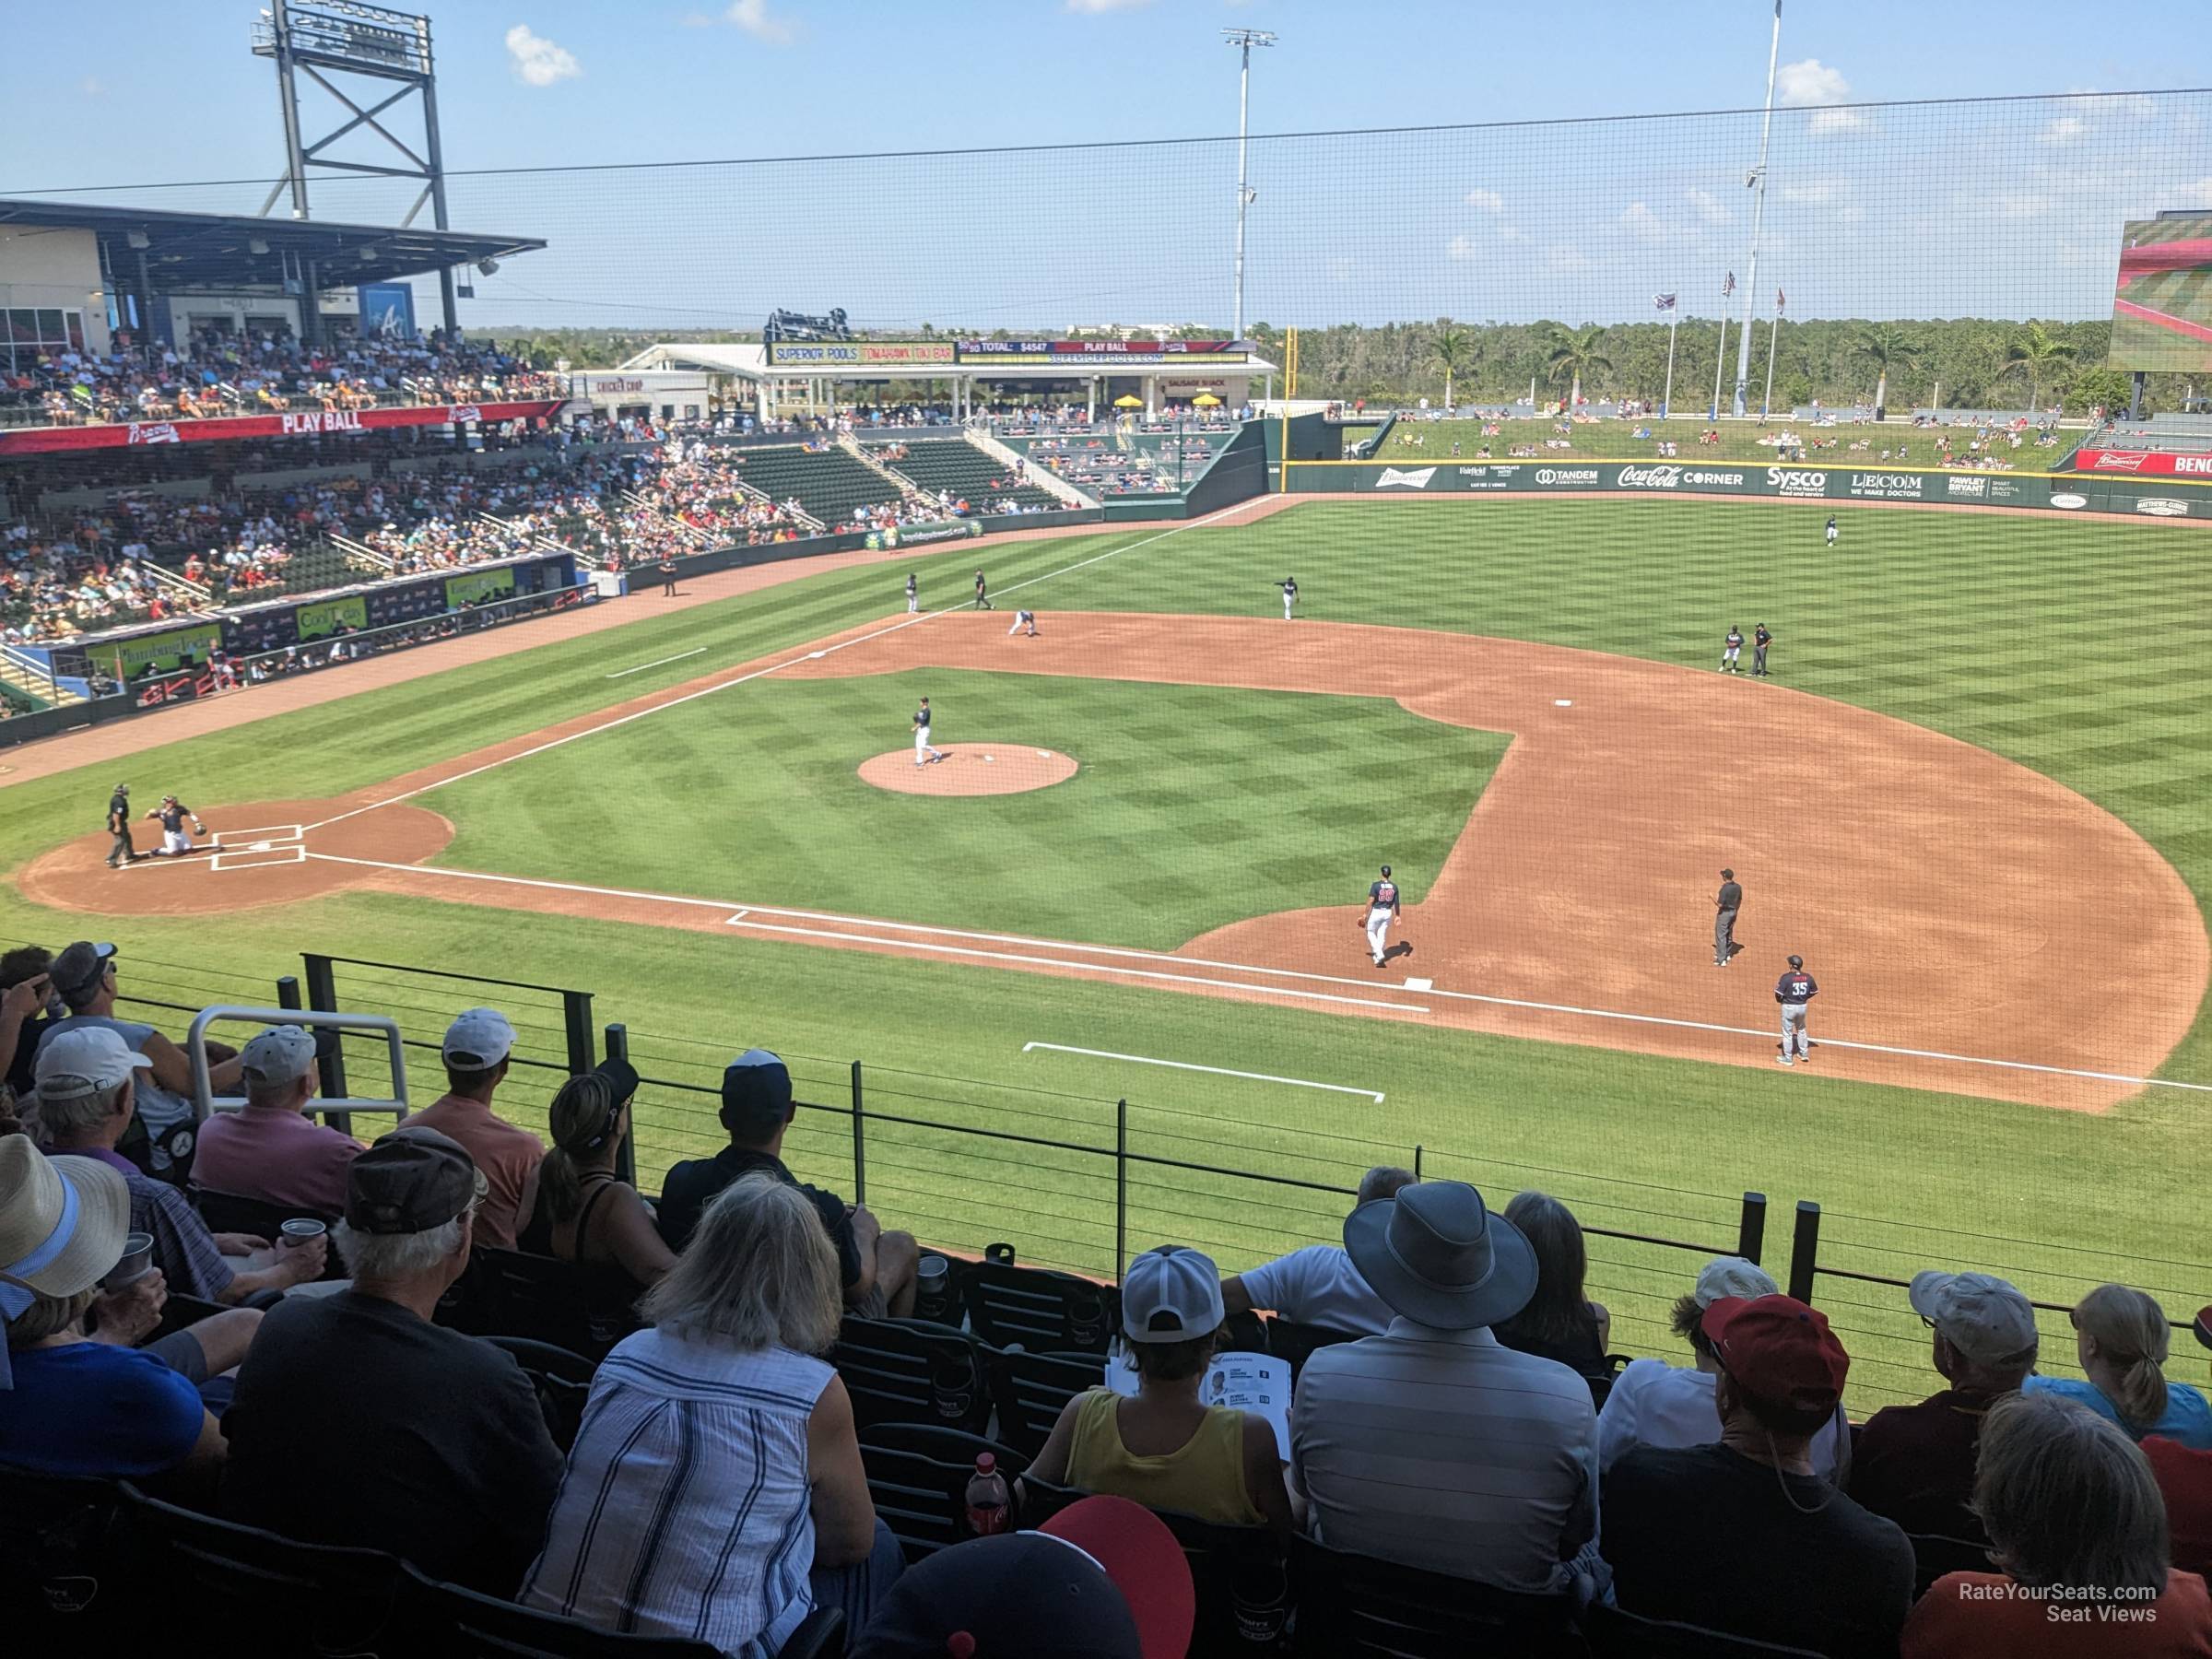 section 202, row 5 seat view  - cooltoday park